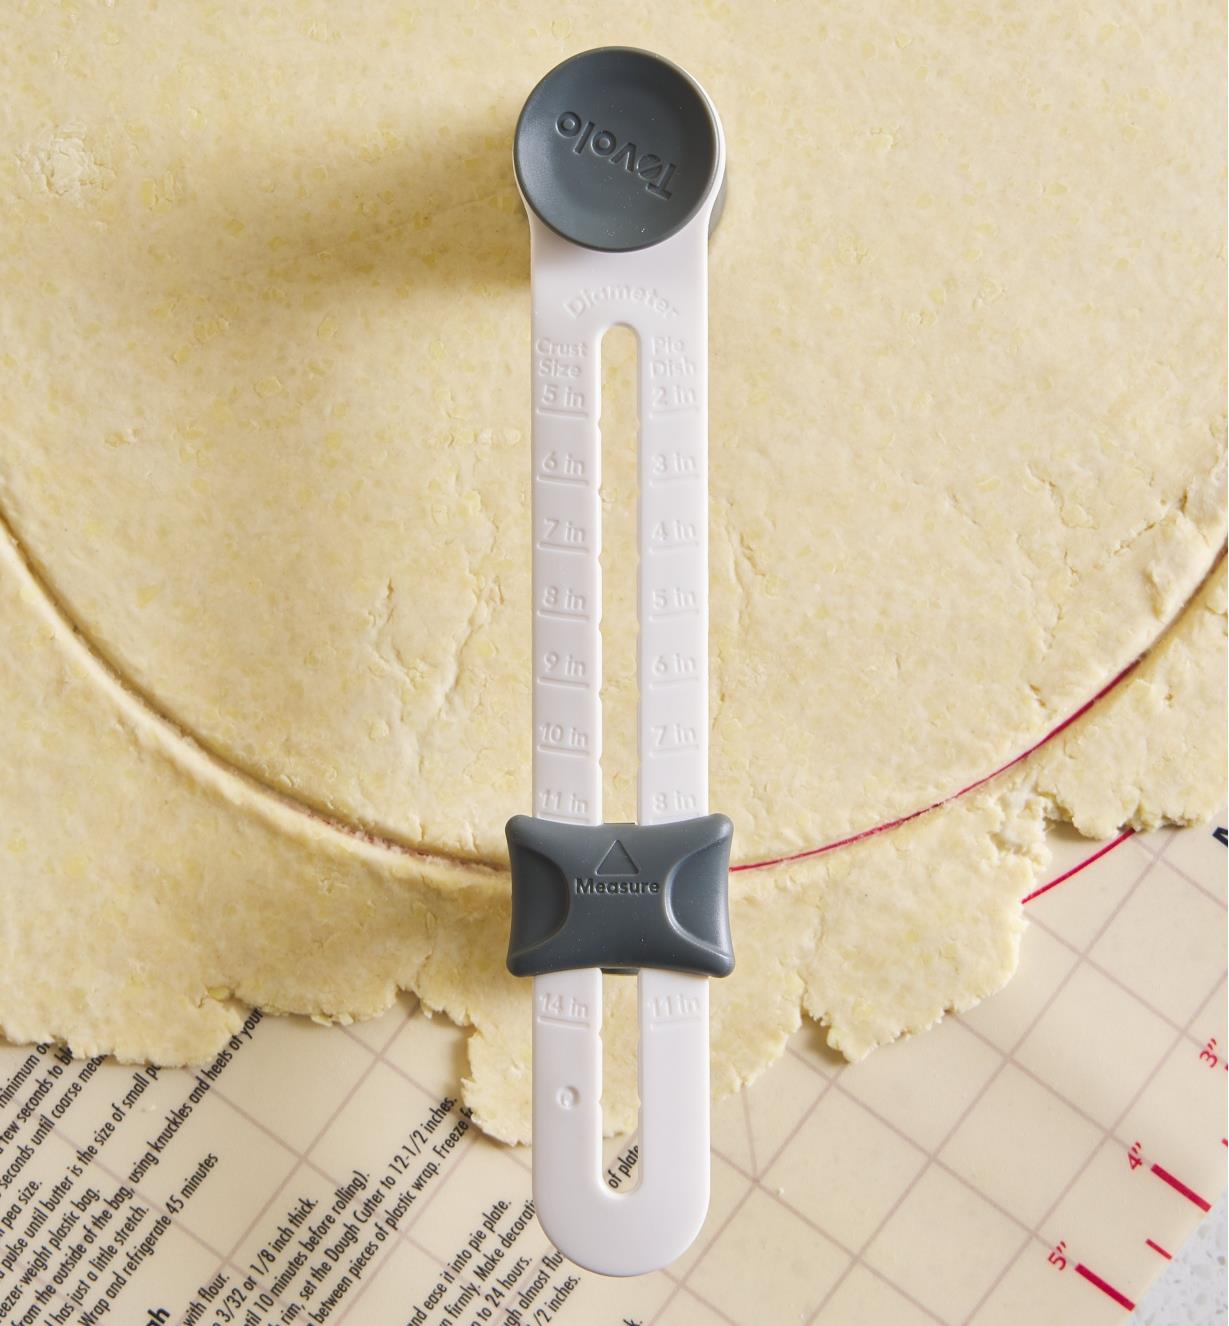 Cutting a circle of dough with a pastry cutter